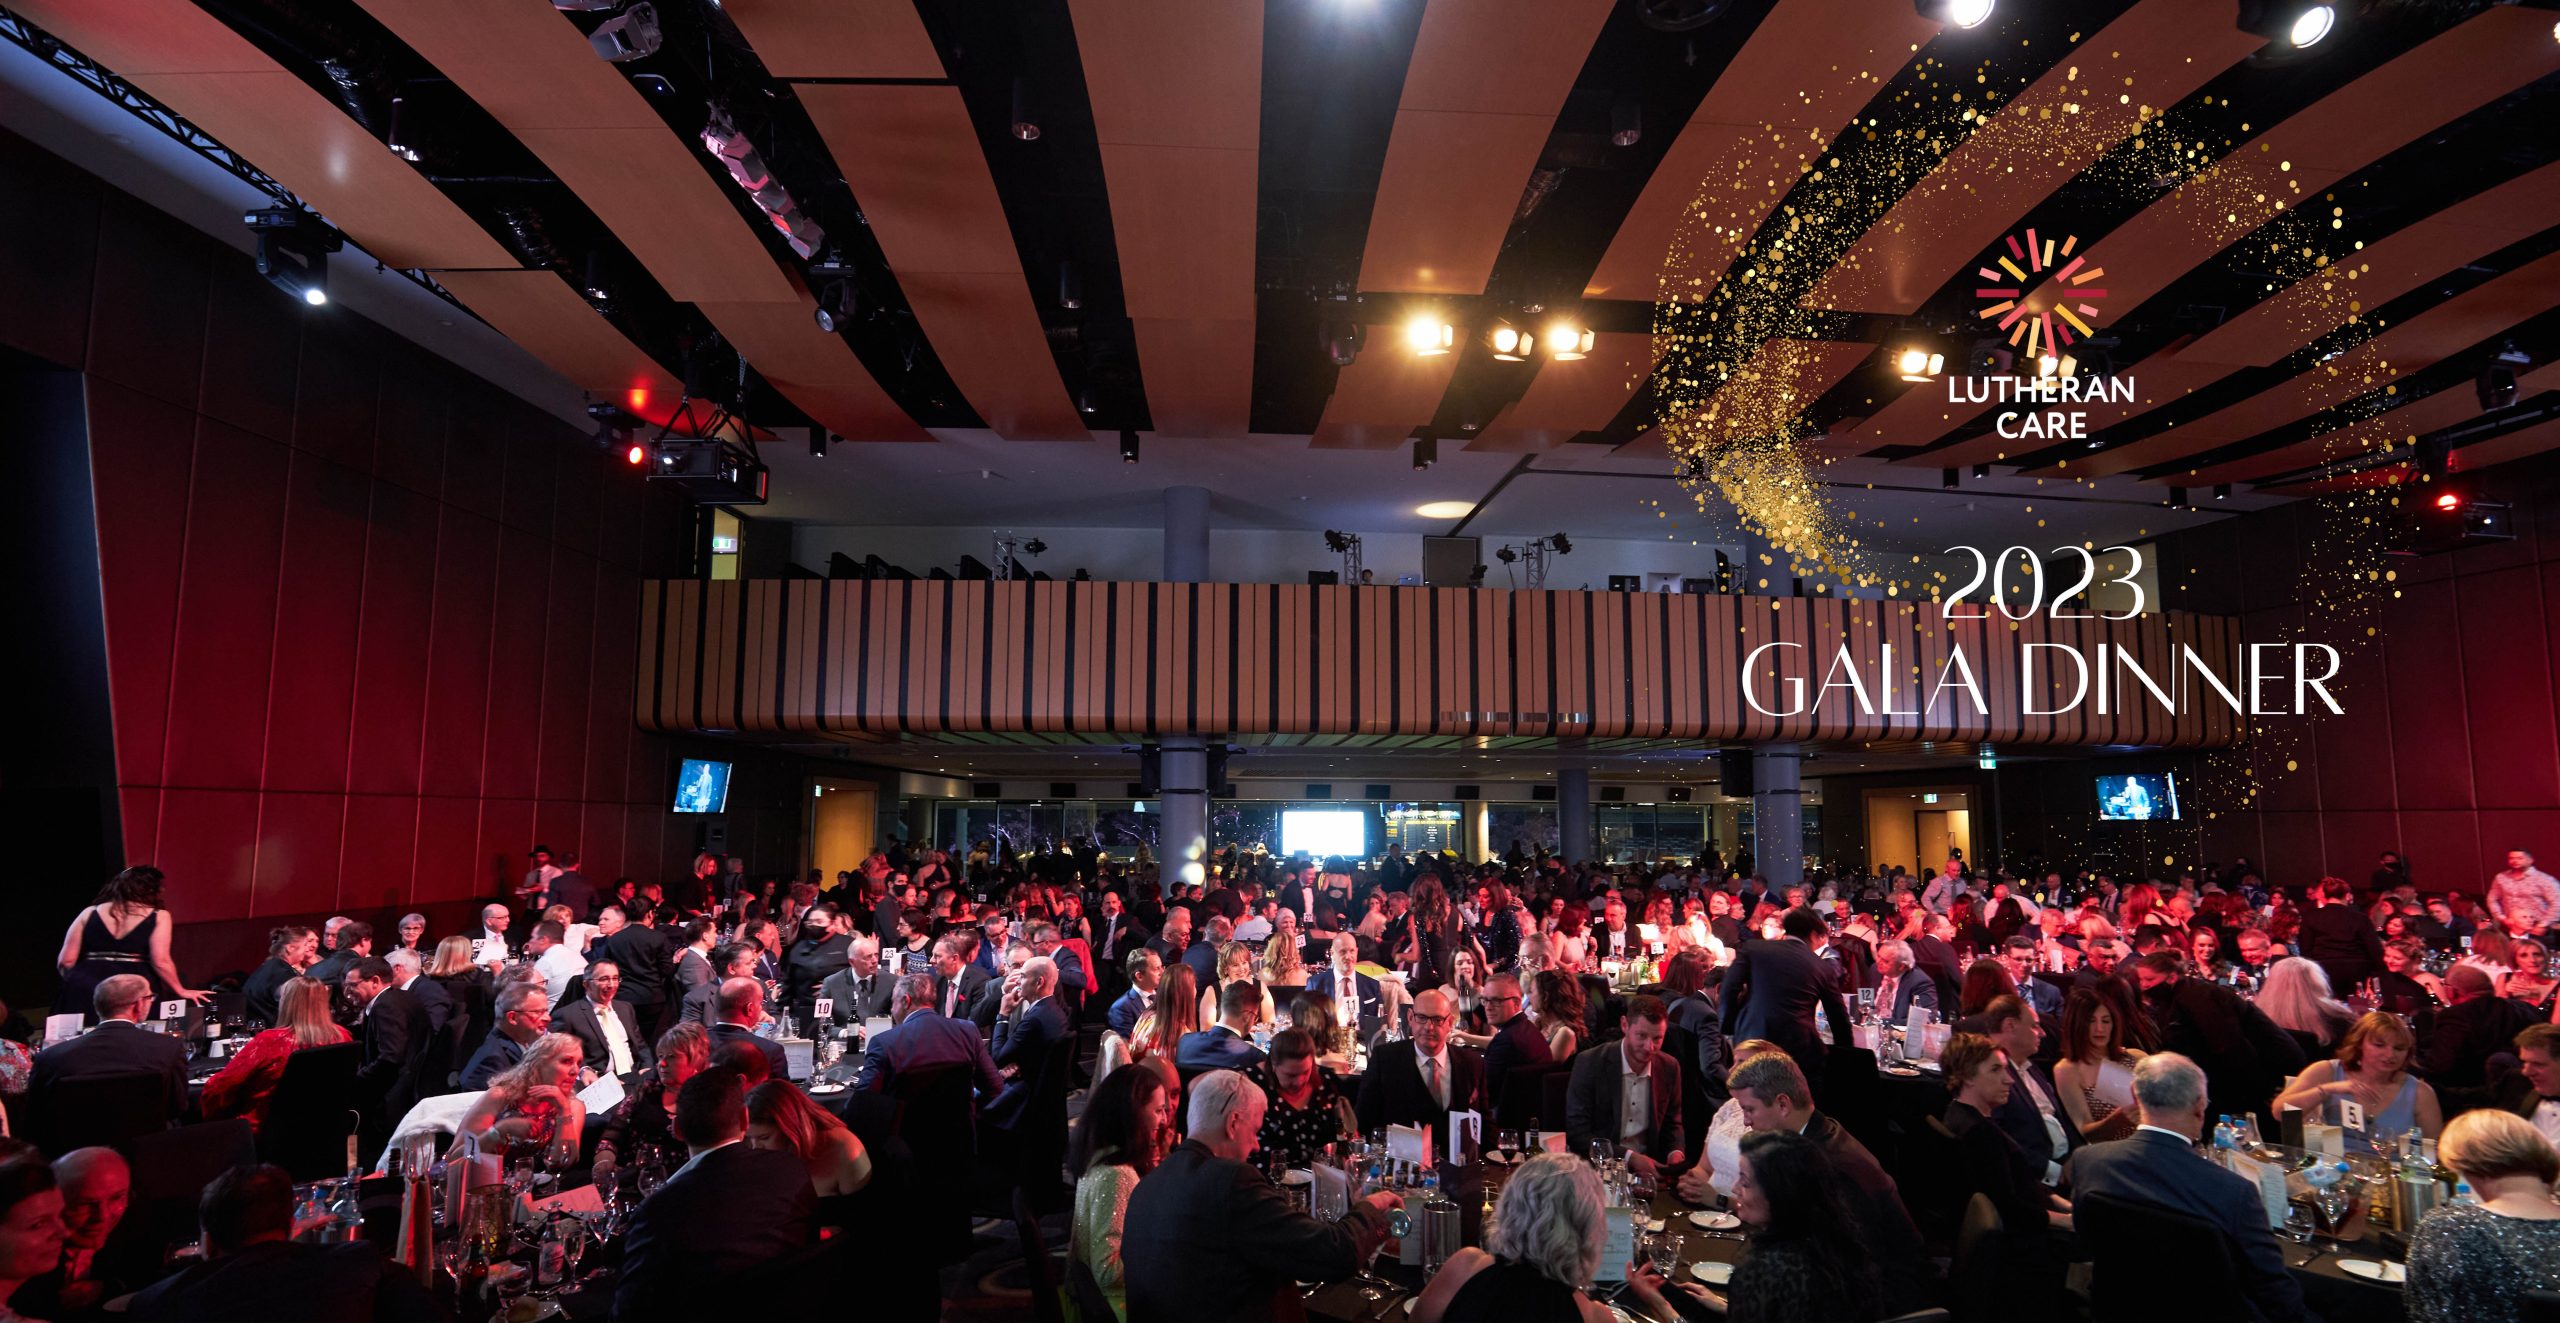 Room view of the 2022 Lutheran Care gala dinner with full tables of people talking and eating. Lutheran Care logo appears in the top right hand corner with text underneath that reads 2023 Gala Dinner.